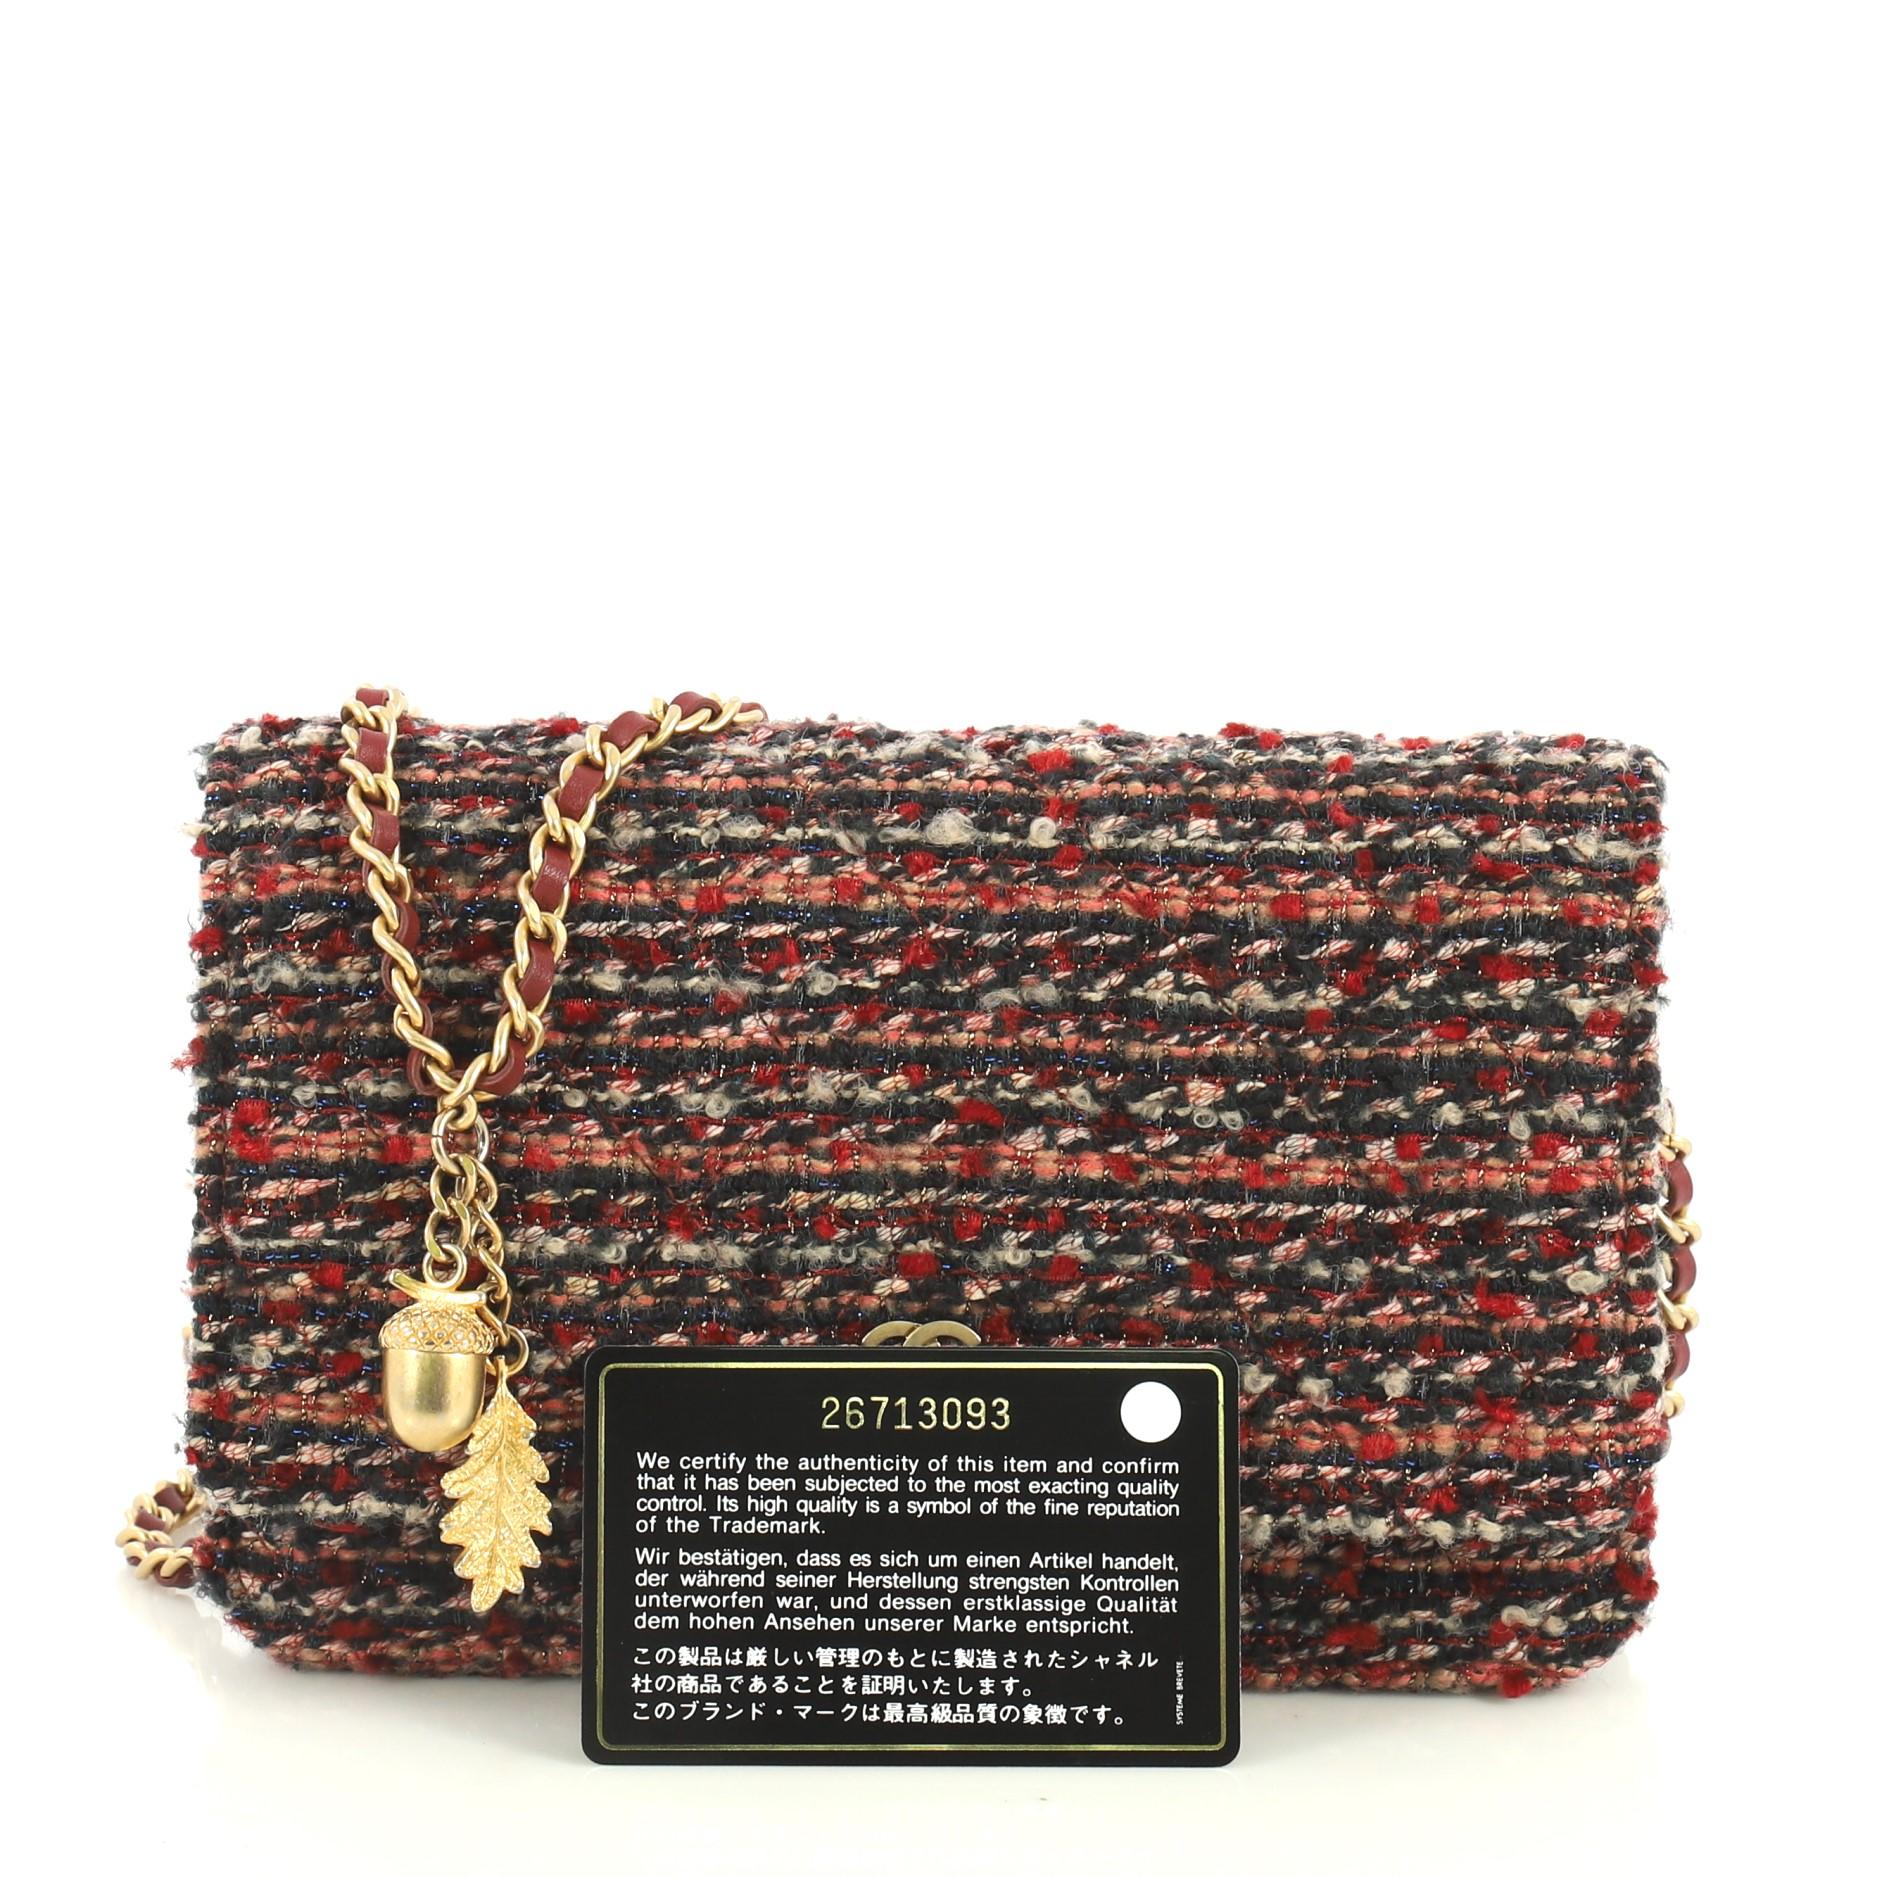 This Chanel Wallet on Chain Tweed, crafted in red multicolor tweed, features woven-in leather chain strap, front flap with CC logo, and gold-tone hardware. Its magnetic snap button closure opens to a red fabric and leather interior with multiple